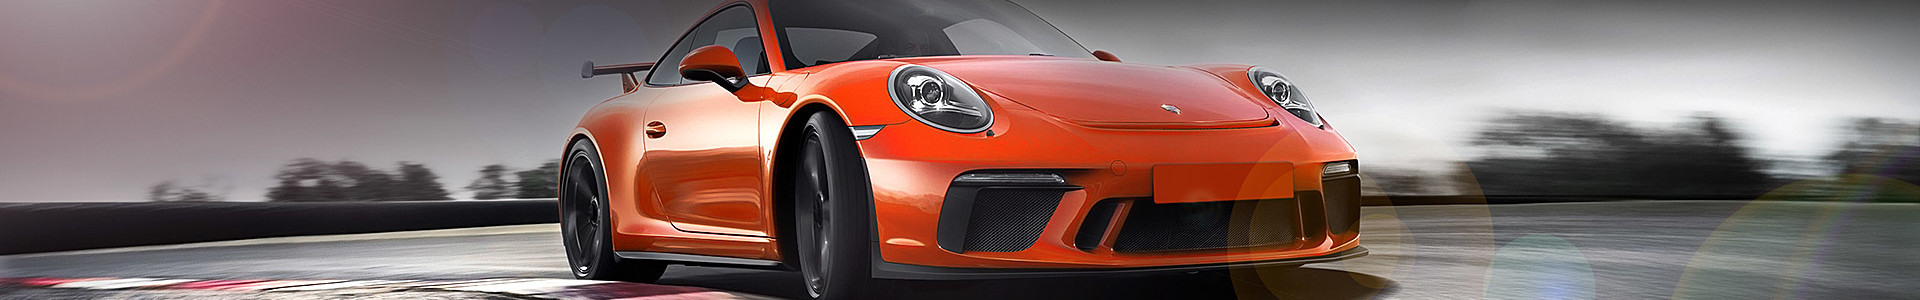 How to find Porsche repair shops that can help with repairs for Porsche or maintenance